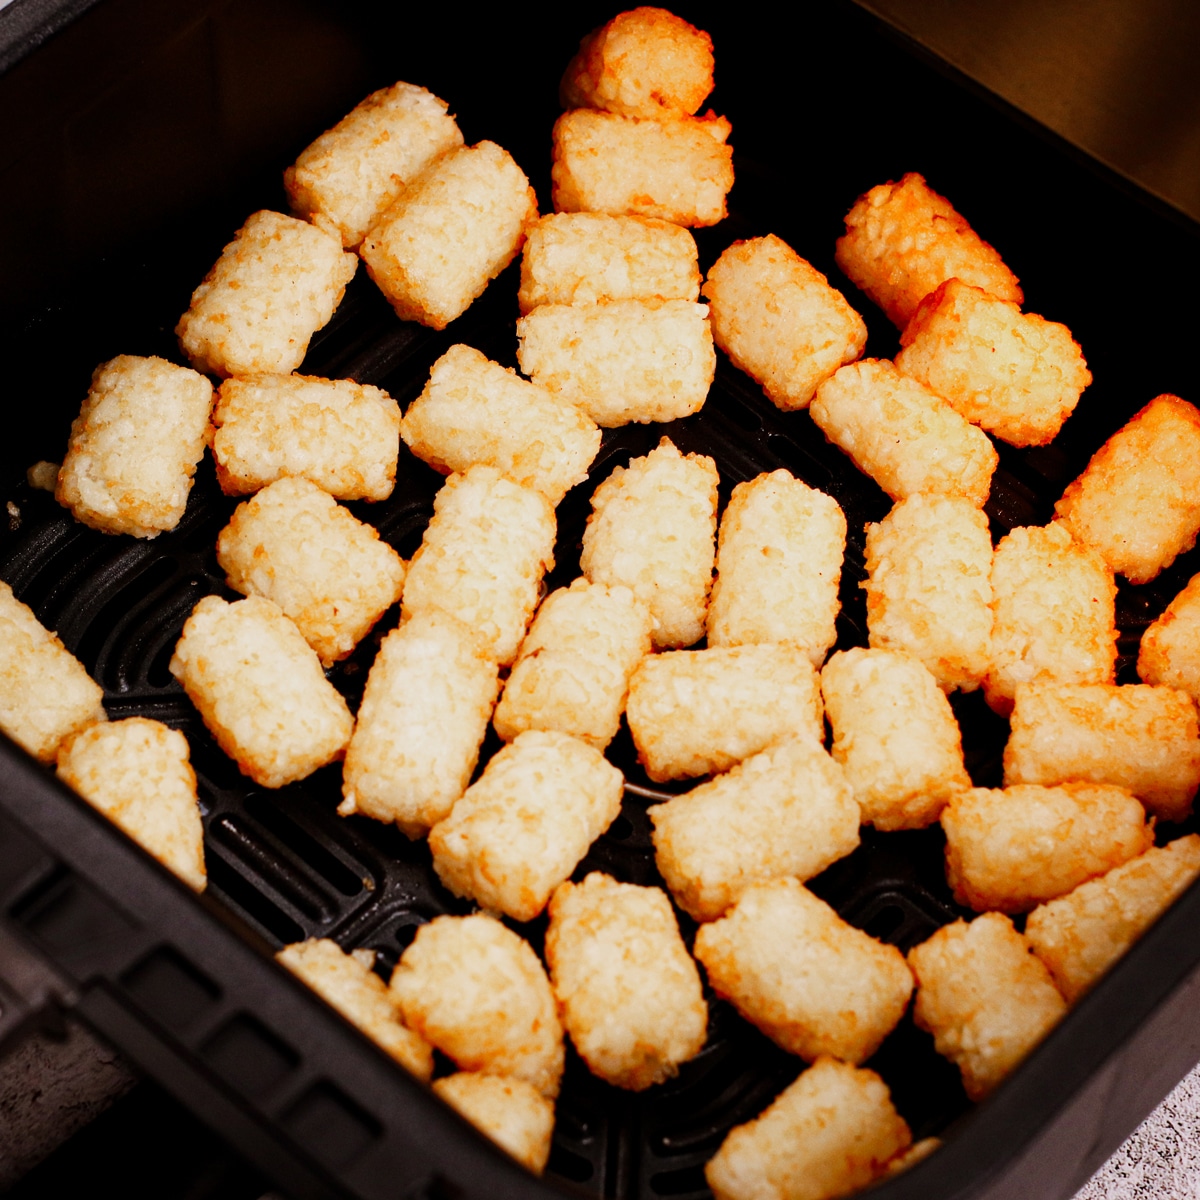 Cooking a pound of frozen tater tots in air fryer